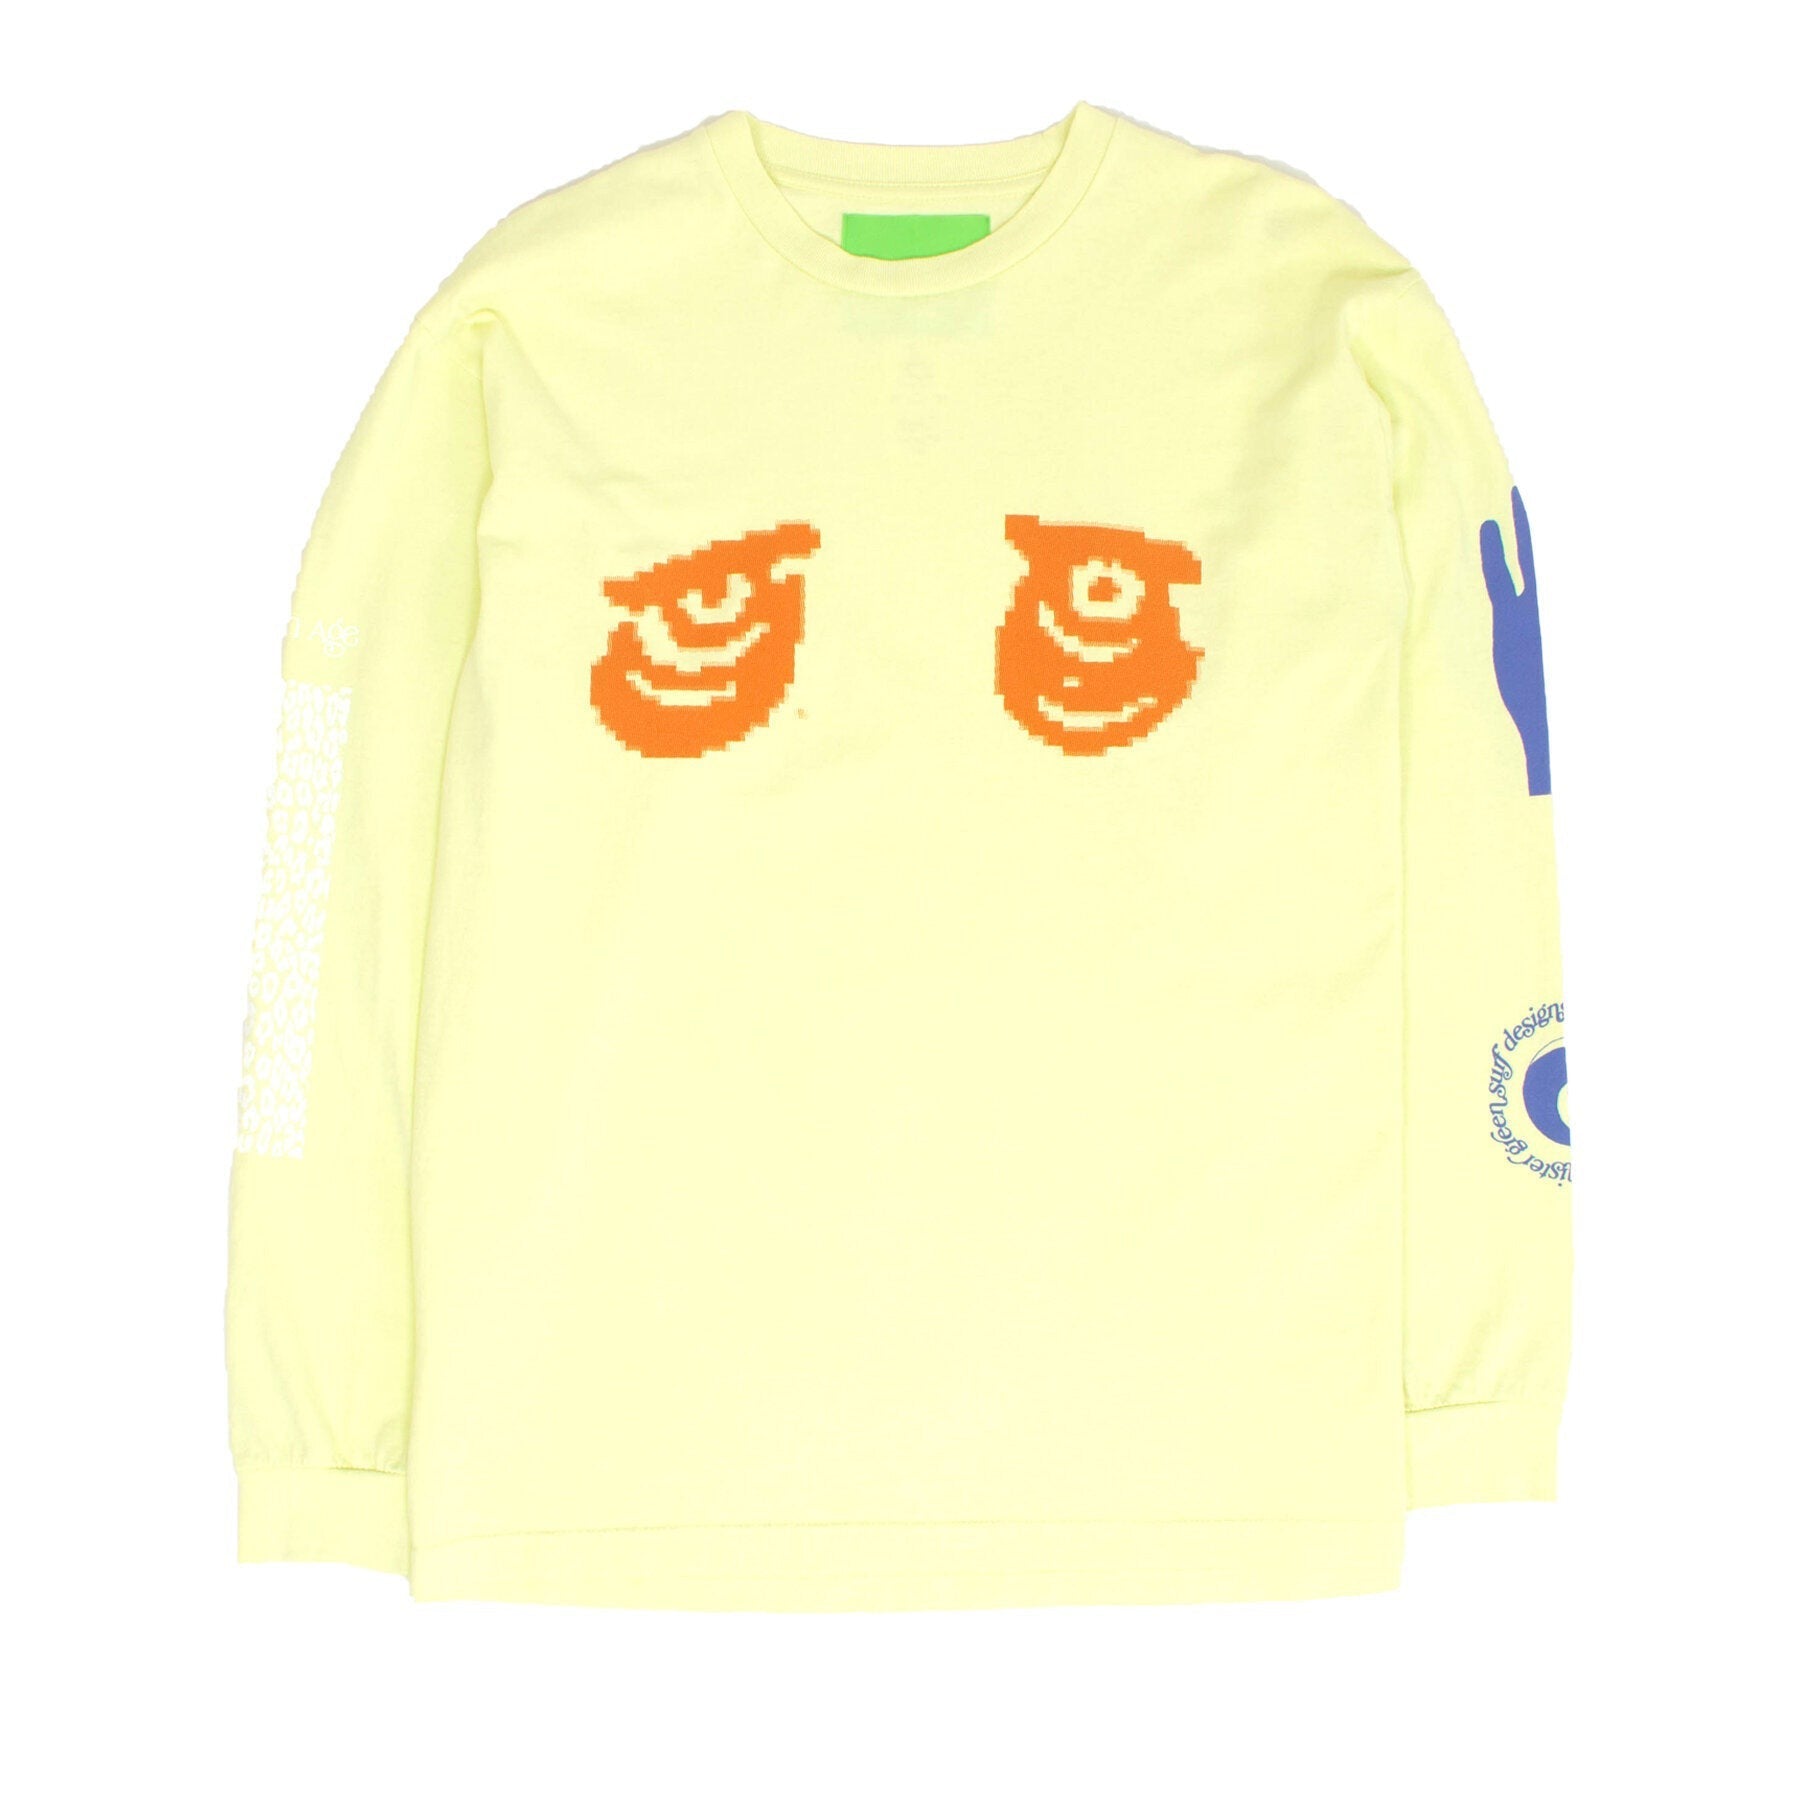 Aquarian Collage L/S Tee - Nuclear-Mister Green-Mister Green